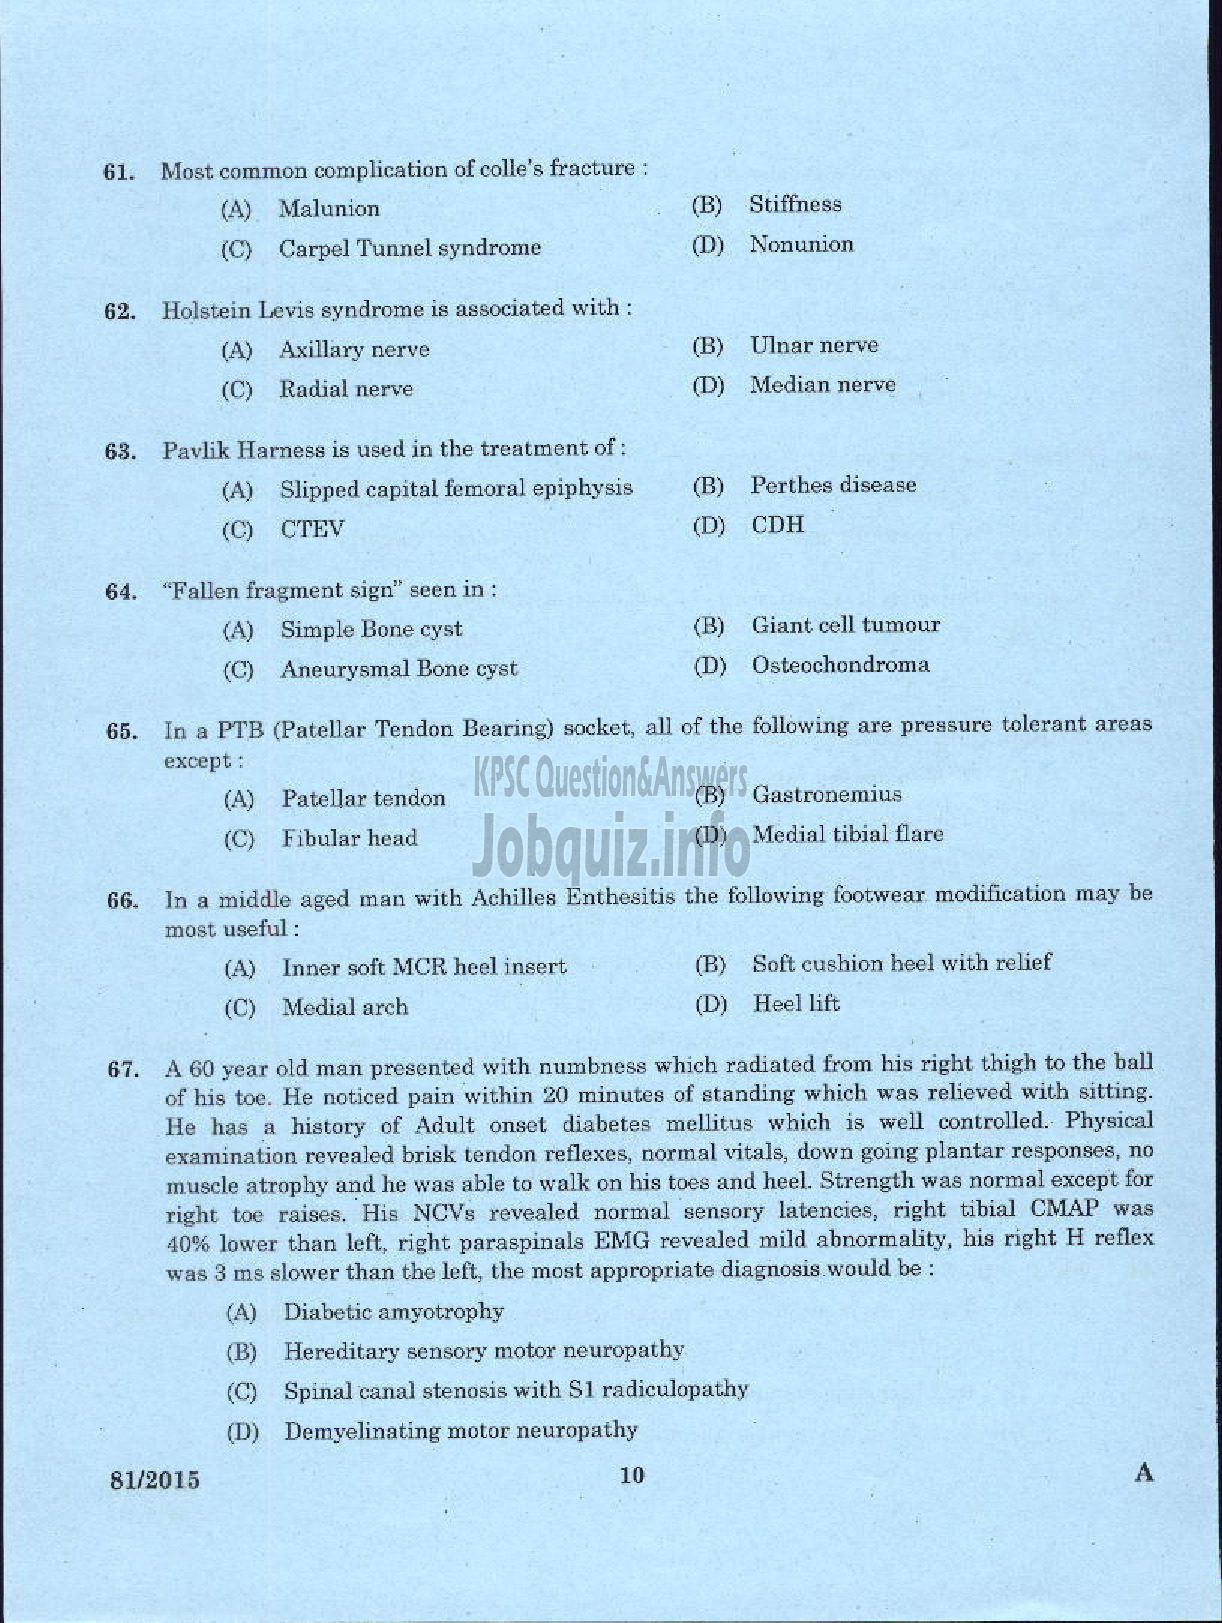 Kerala PSC Question Paper - ASSISTANT SURGEON CASUALITY MEDICAL OFFICER HEALTH SERVICES MEDICAL OFFICER KERALA FACTORIES ANS BOILERS SERVICE ASSISTANT INSURANCE MEDICAL OFFICER IMS-8